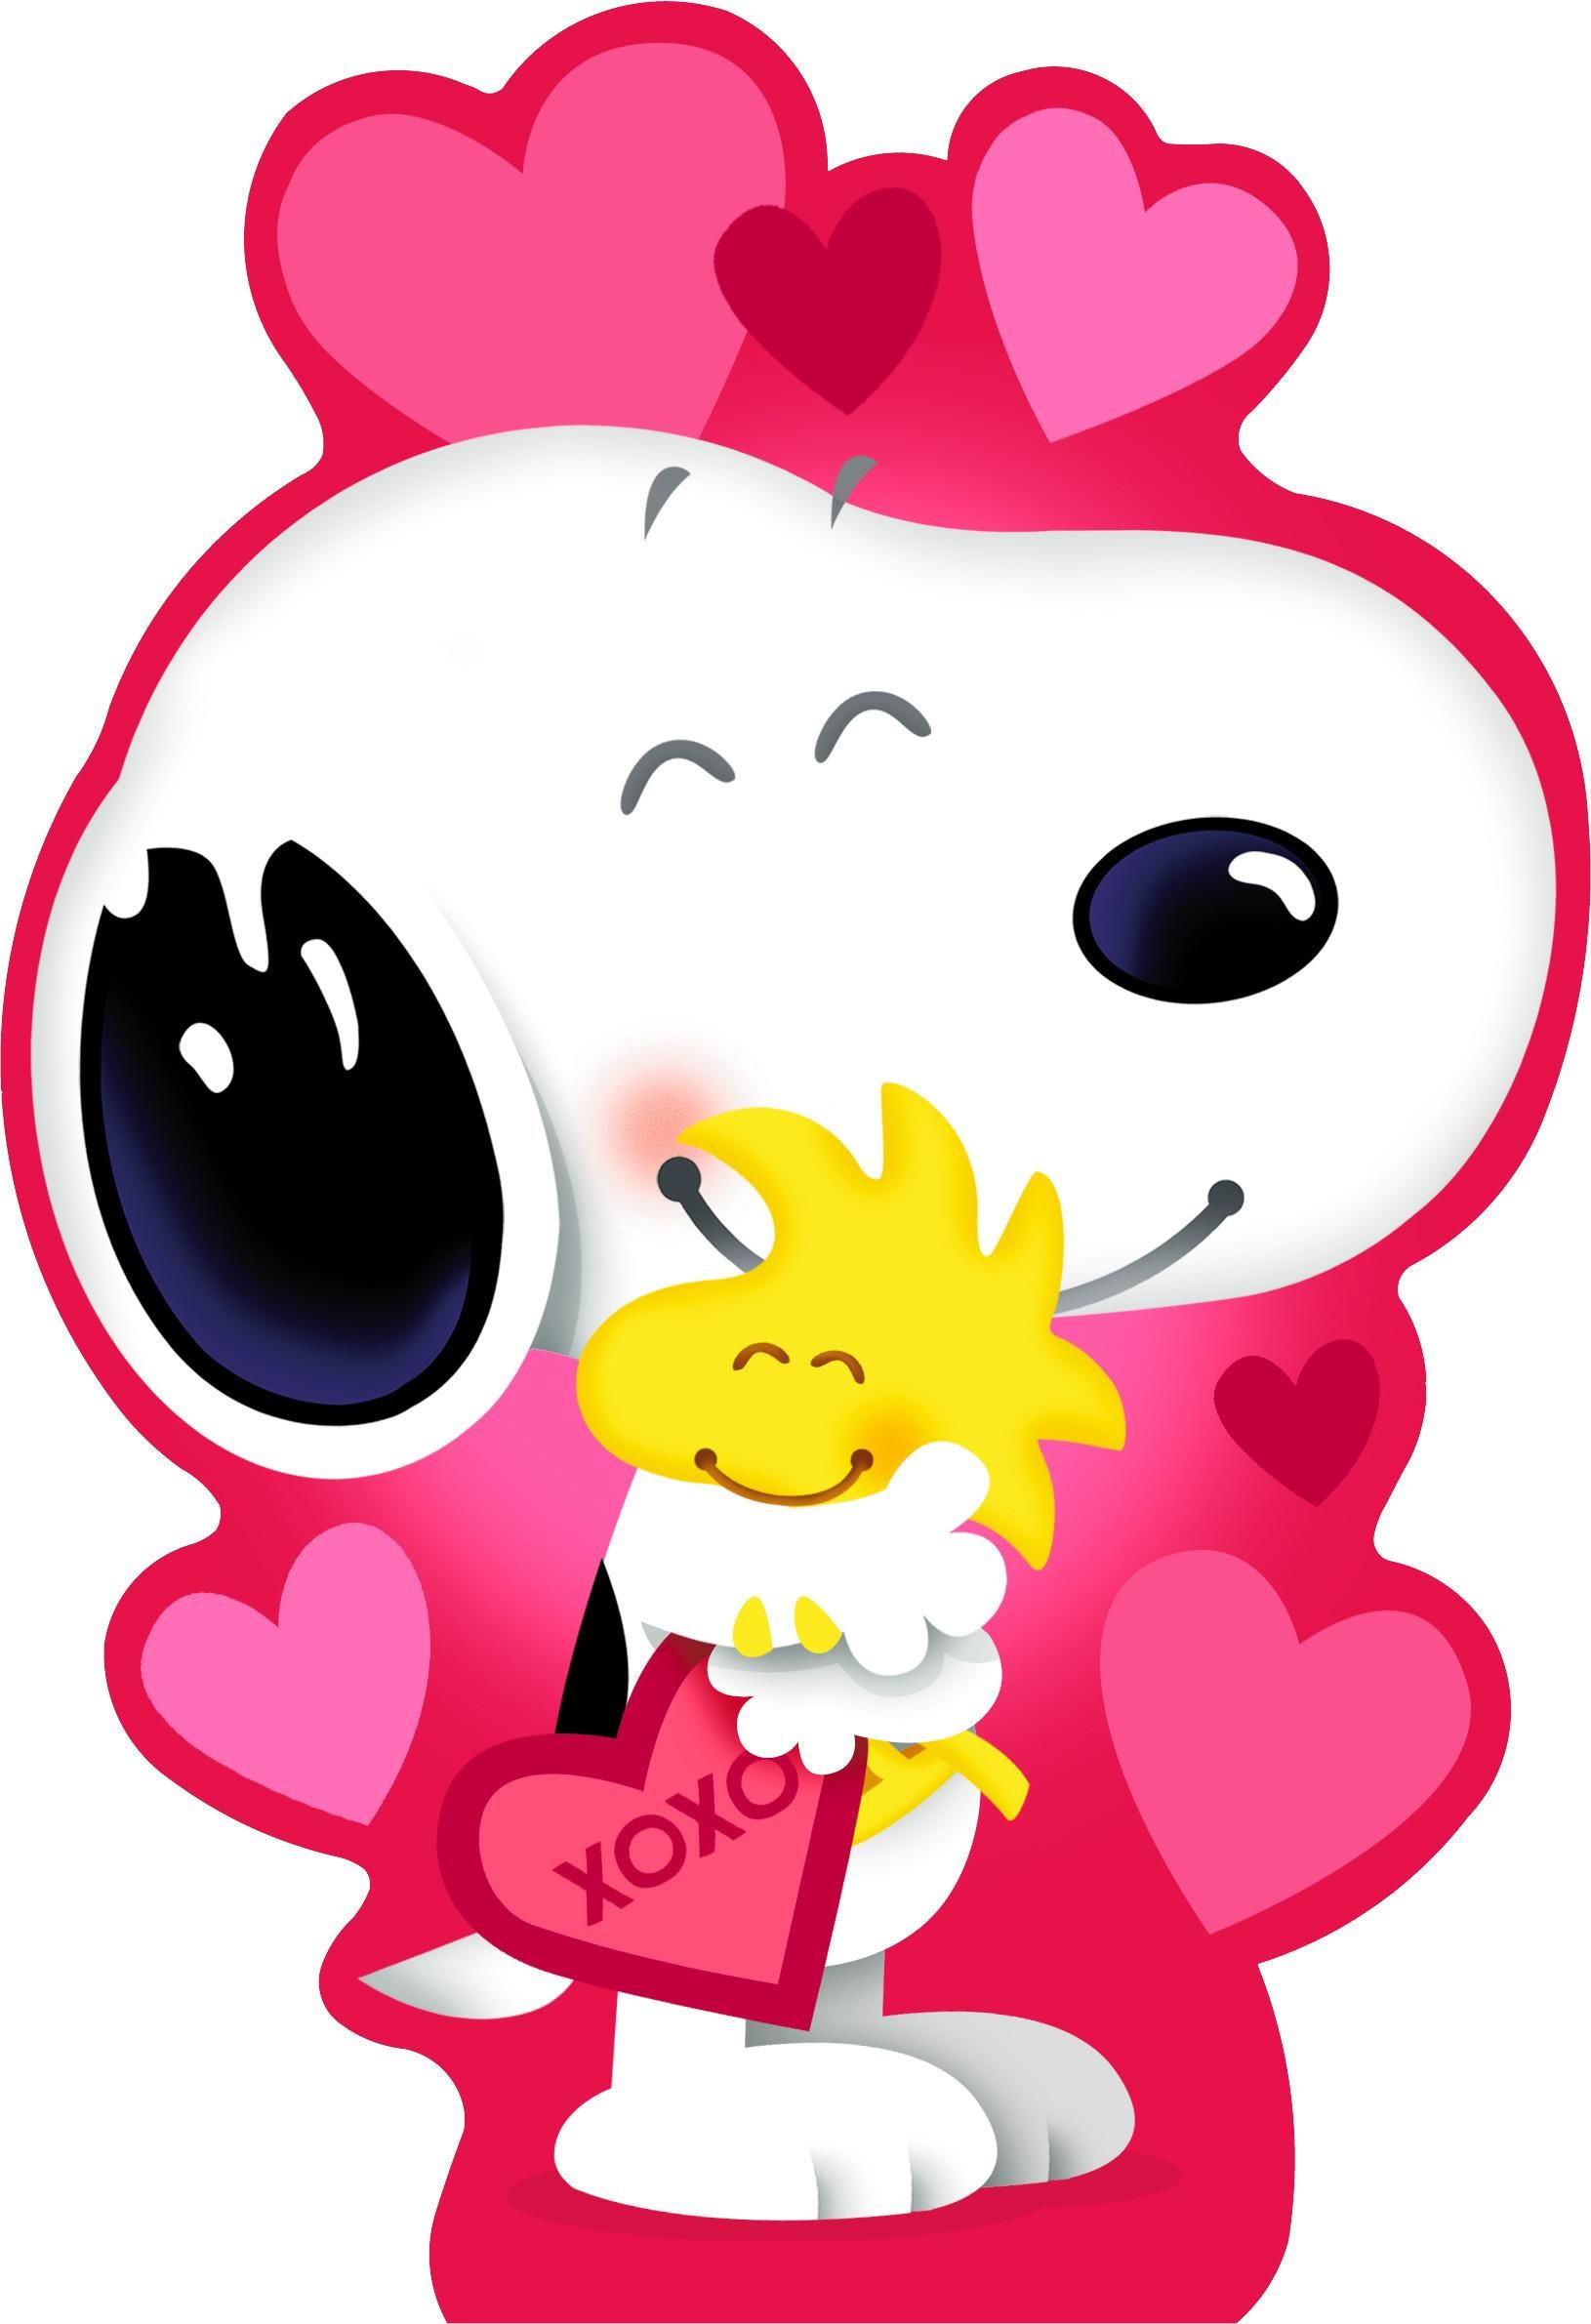 snoopy-valentines-day-background-carrotapp